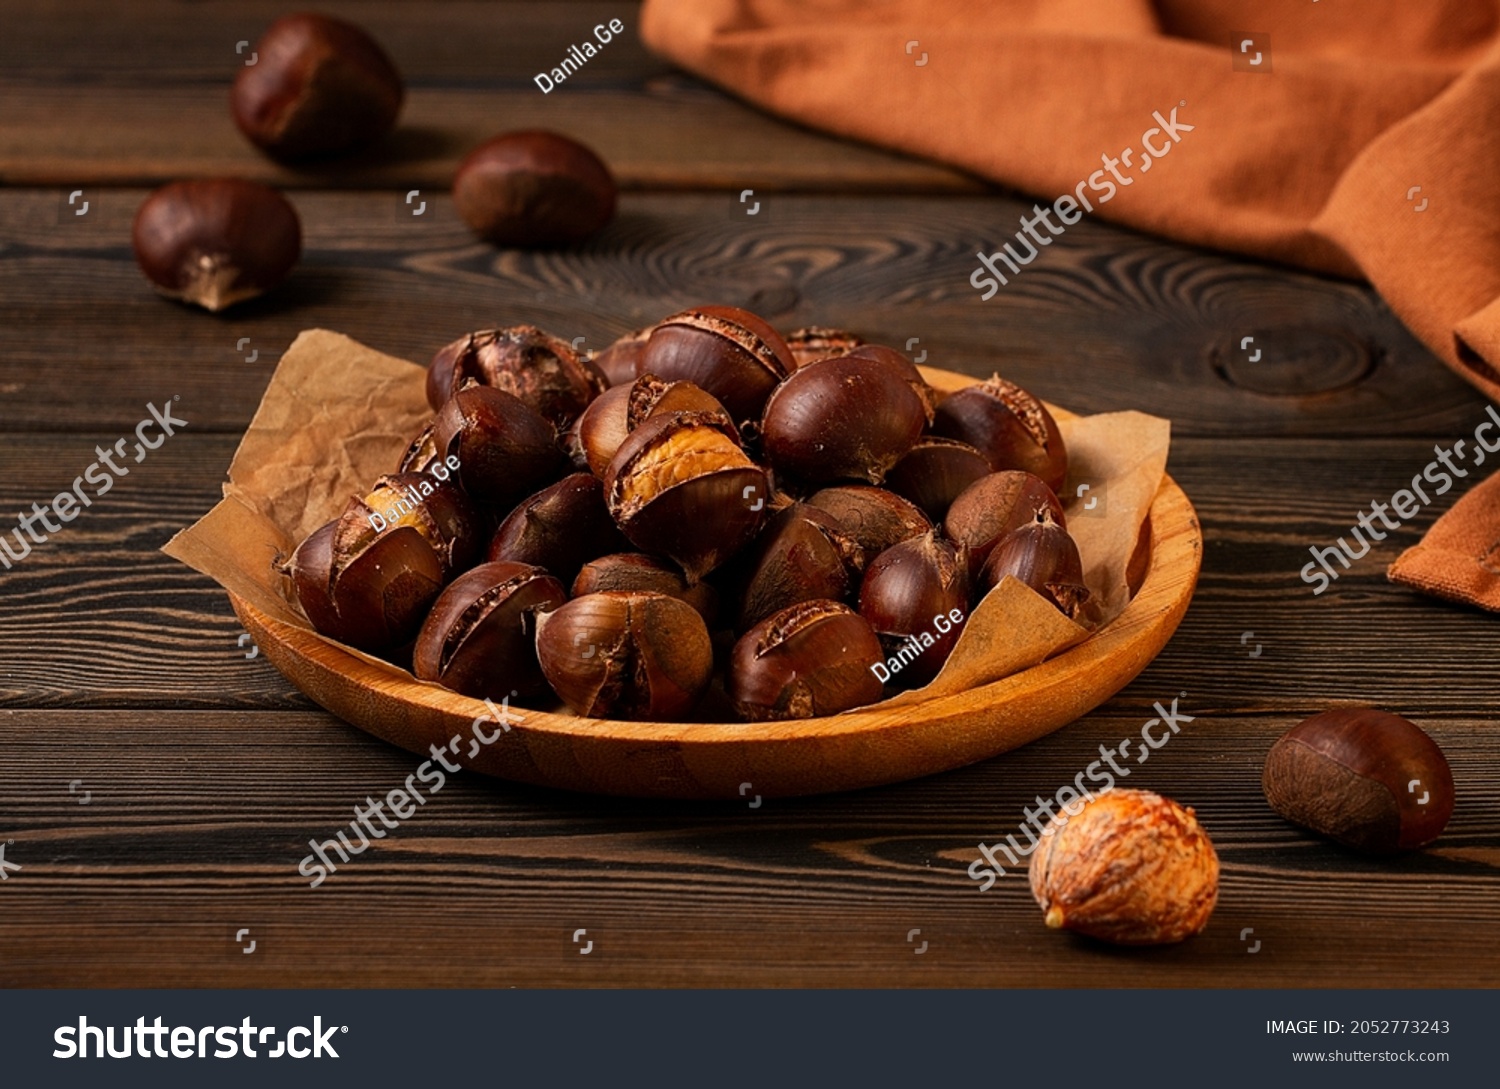 Roasted chestnut, on a wooden table, no people, #2052773243